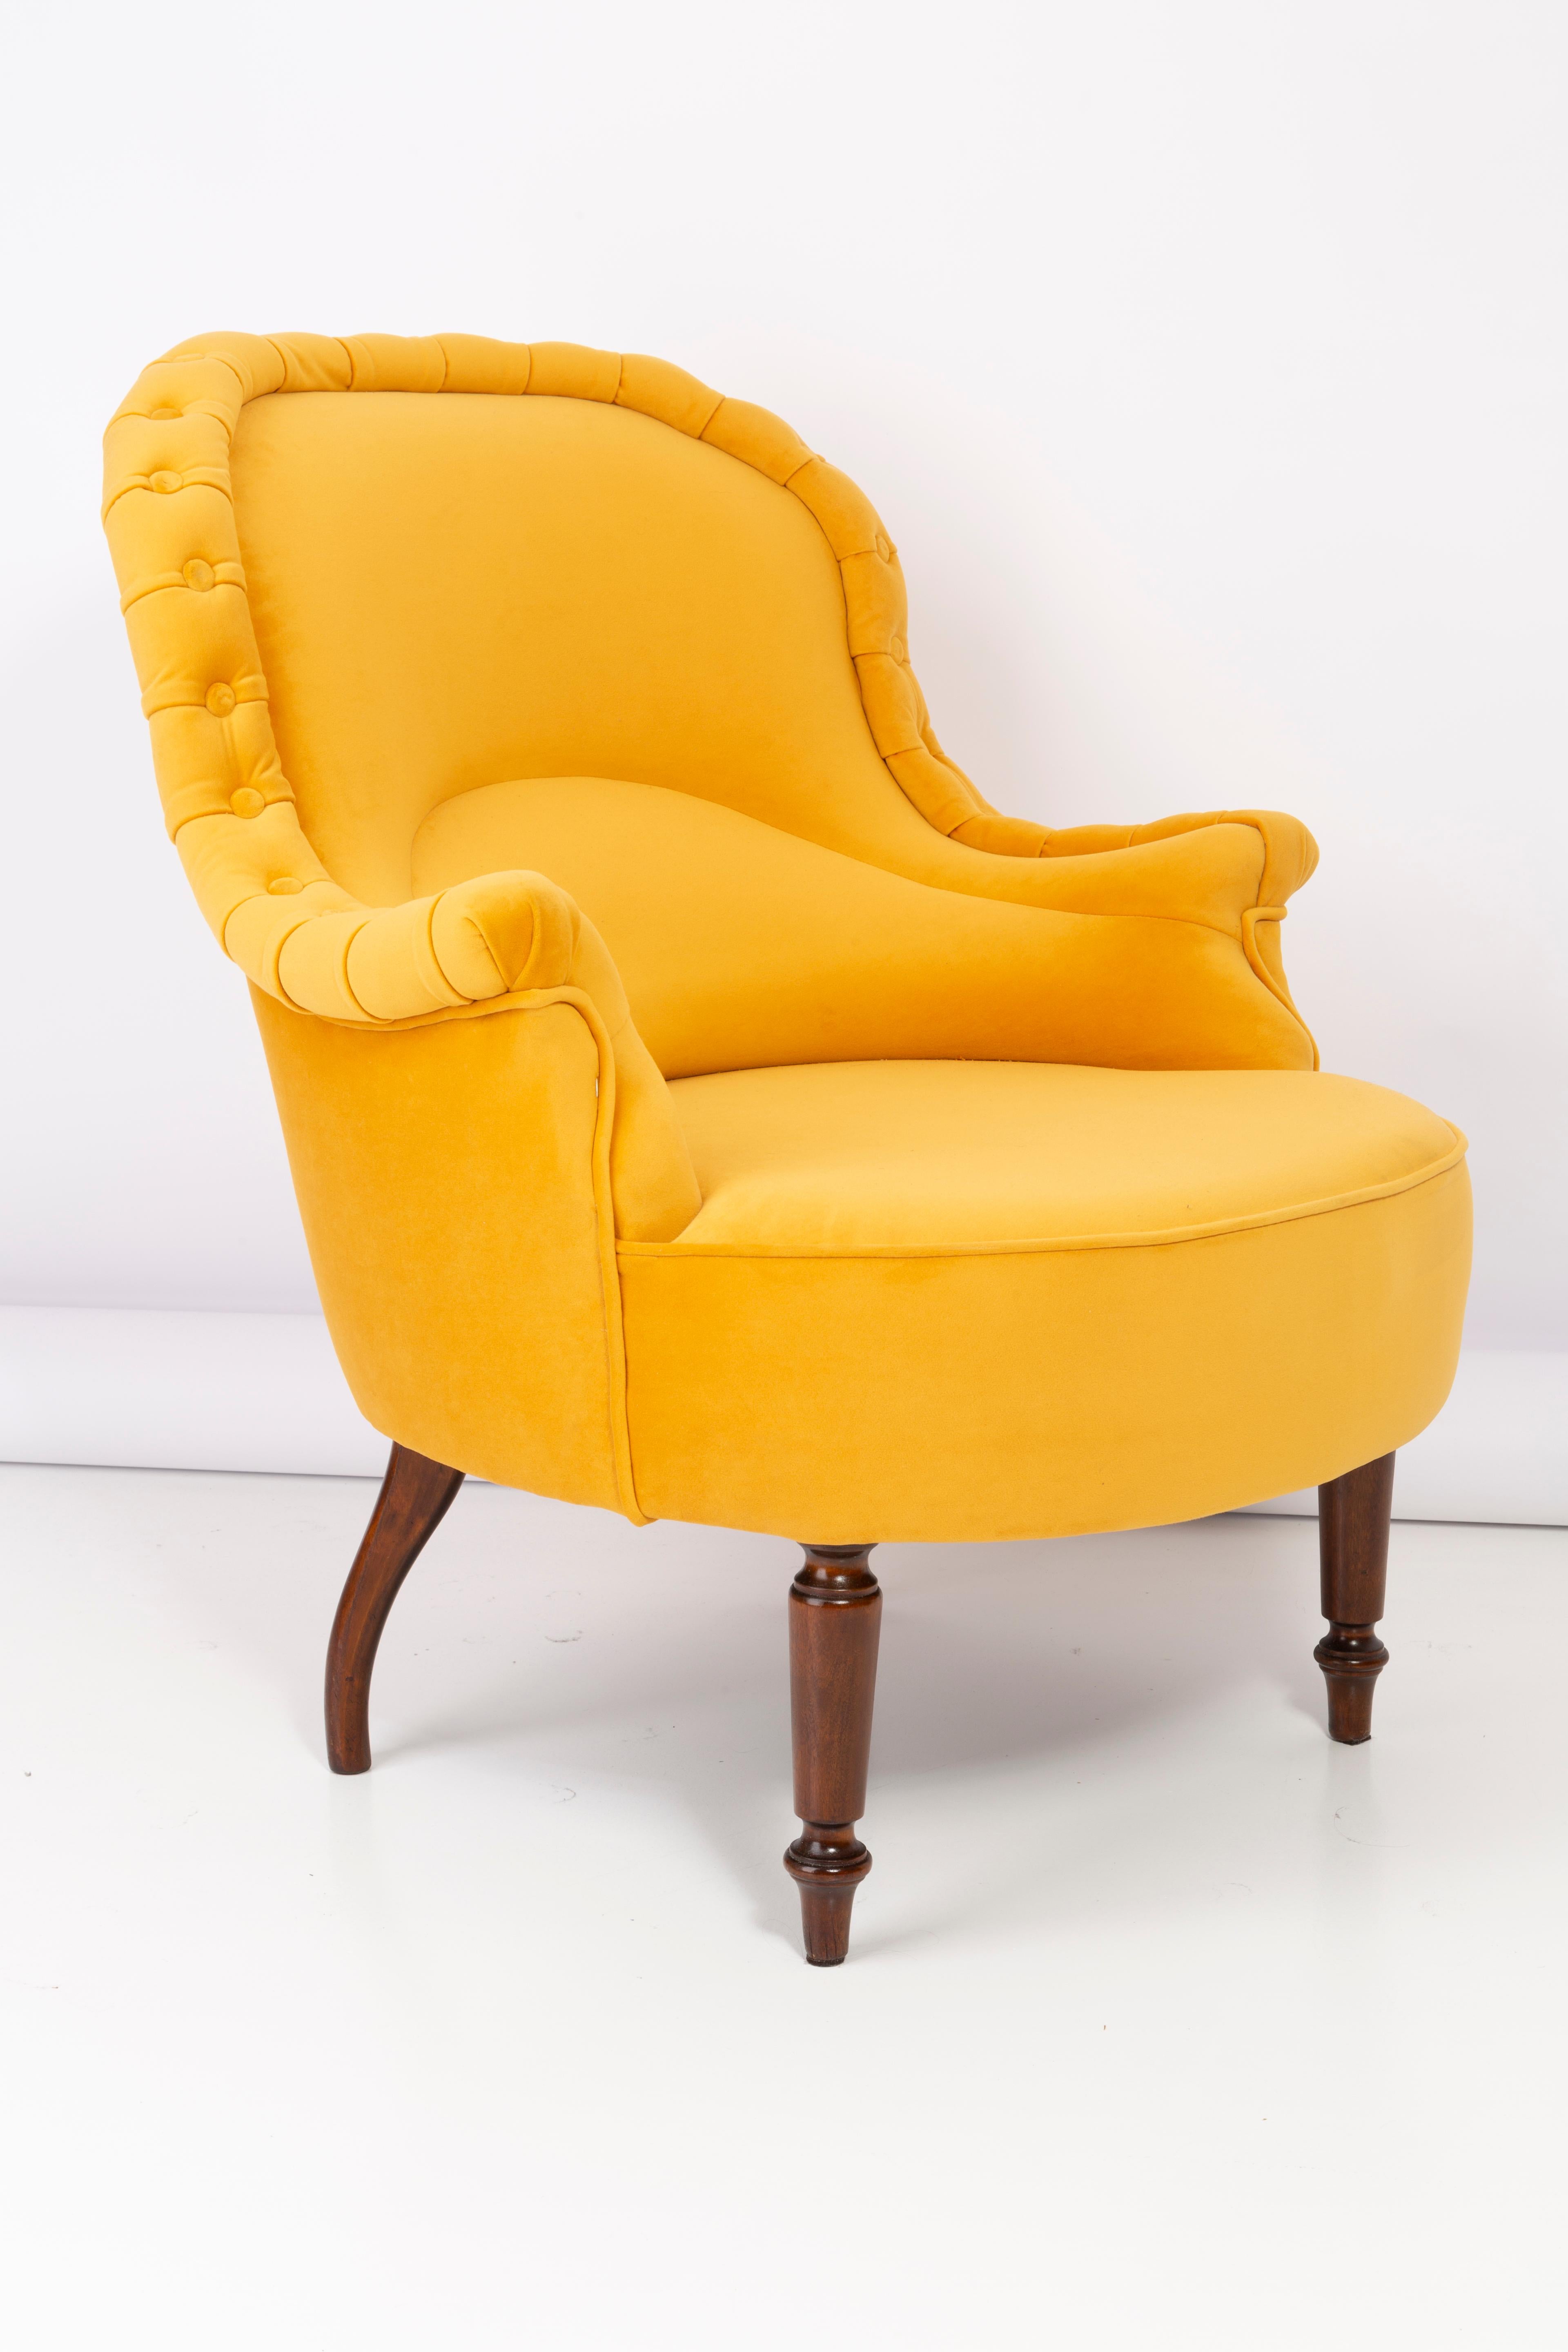 Mid-Century Modern Unique Yellow Mustard Armchair, 1930s, Germany For Sale